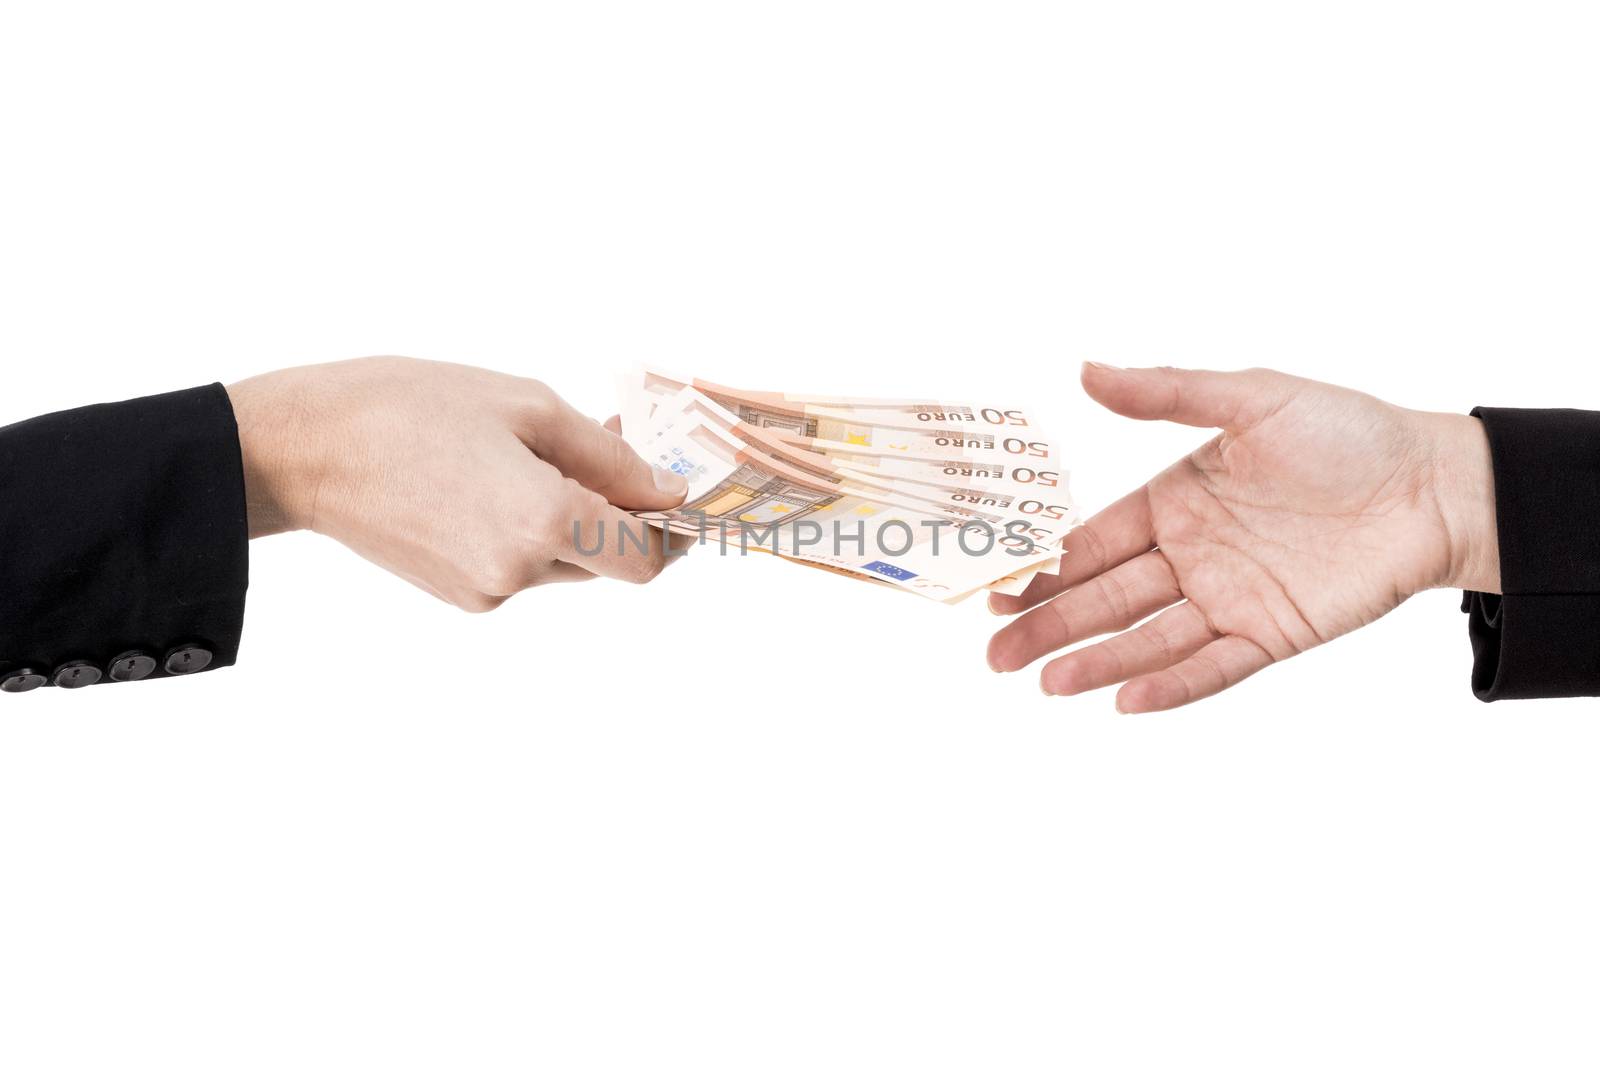 Concept image of hands making and receiving a payment, isolated over white background